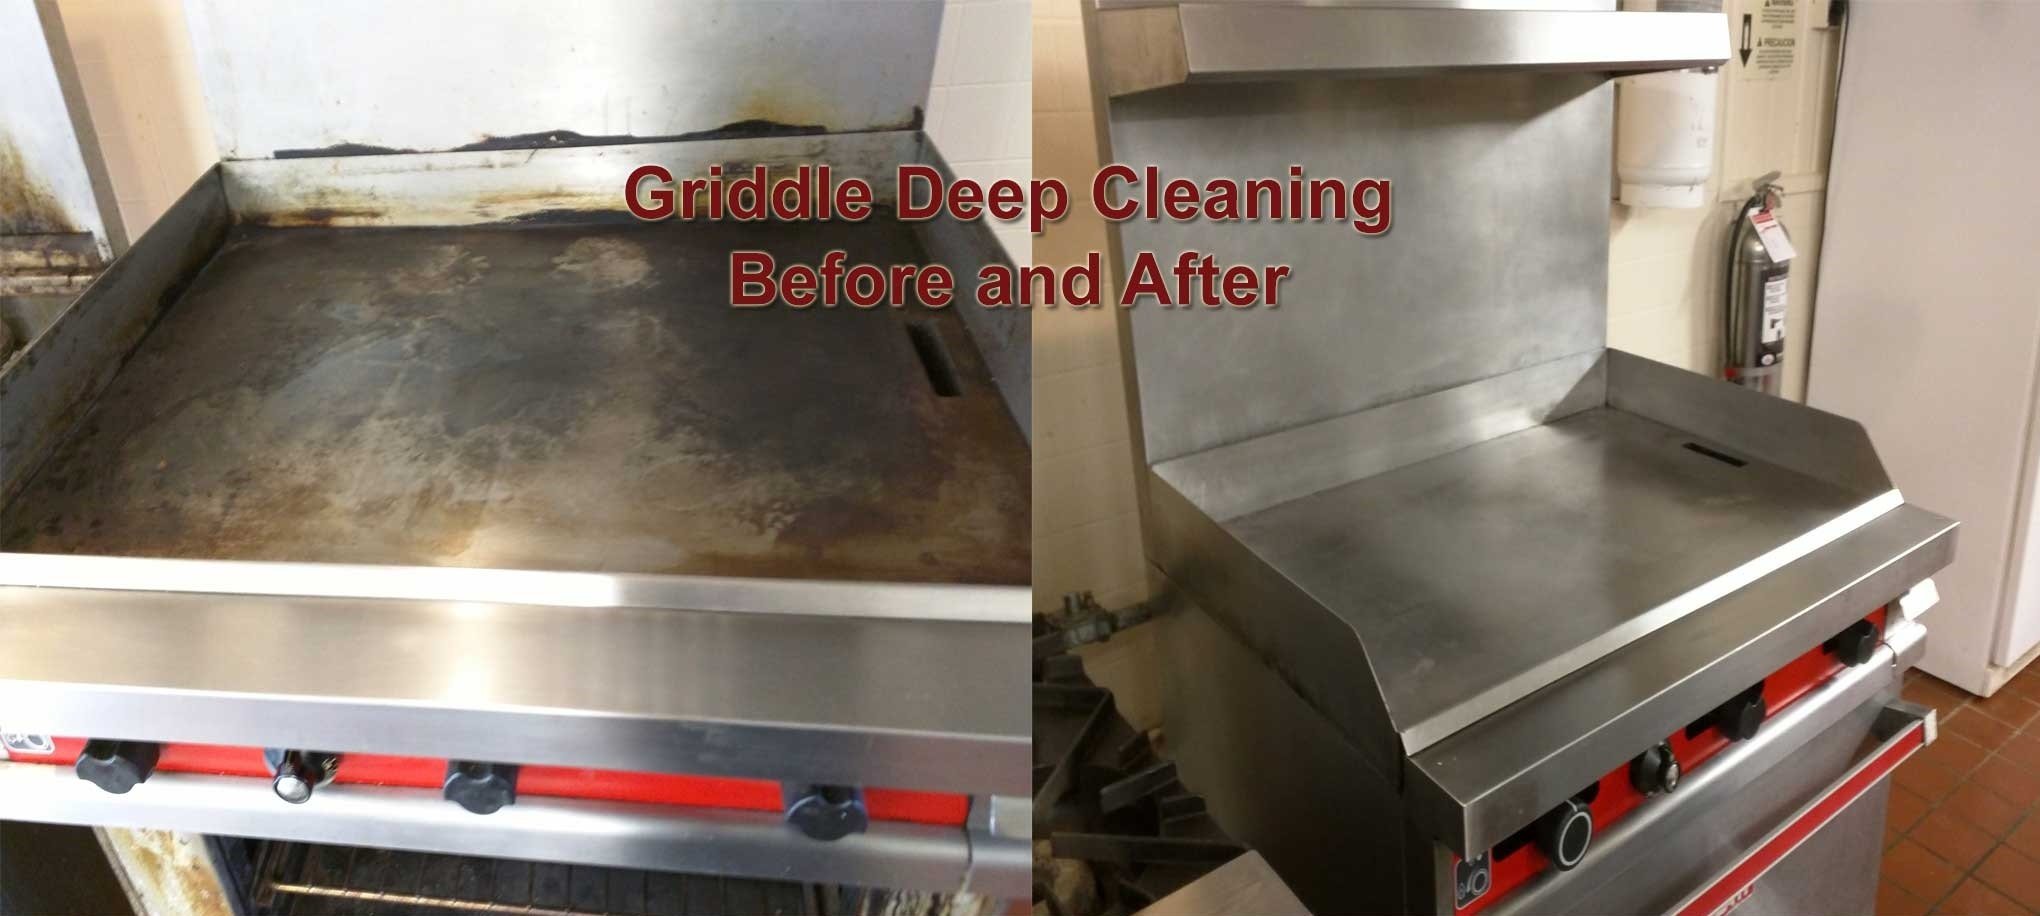 https://www.steamcleaning.us/restaurant-steam-cleaning/griddle-deep-cleaning-before-and-after/